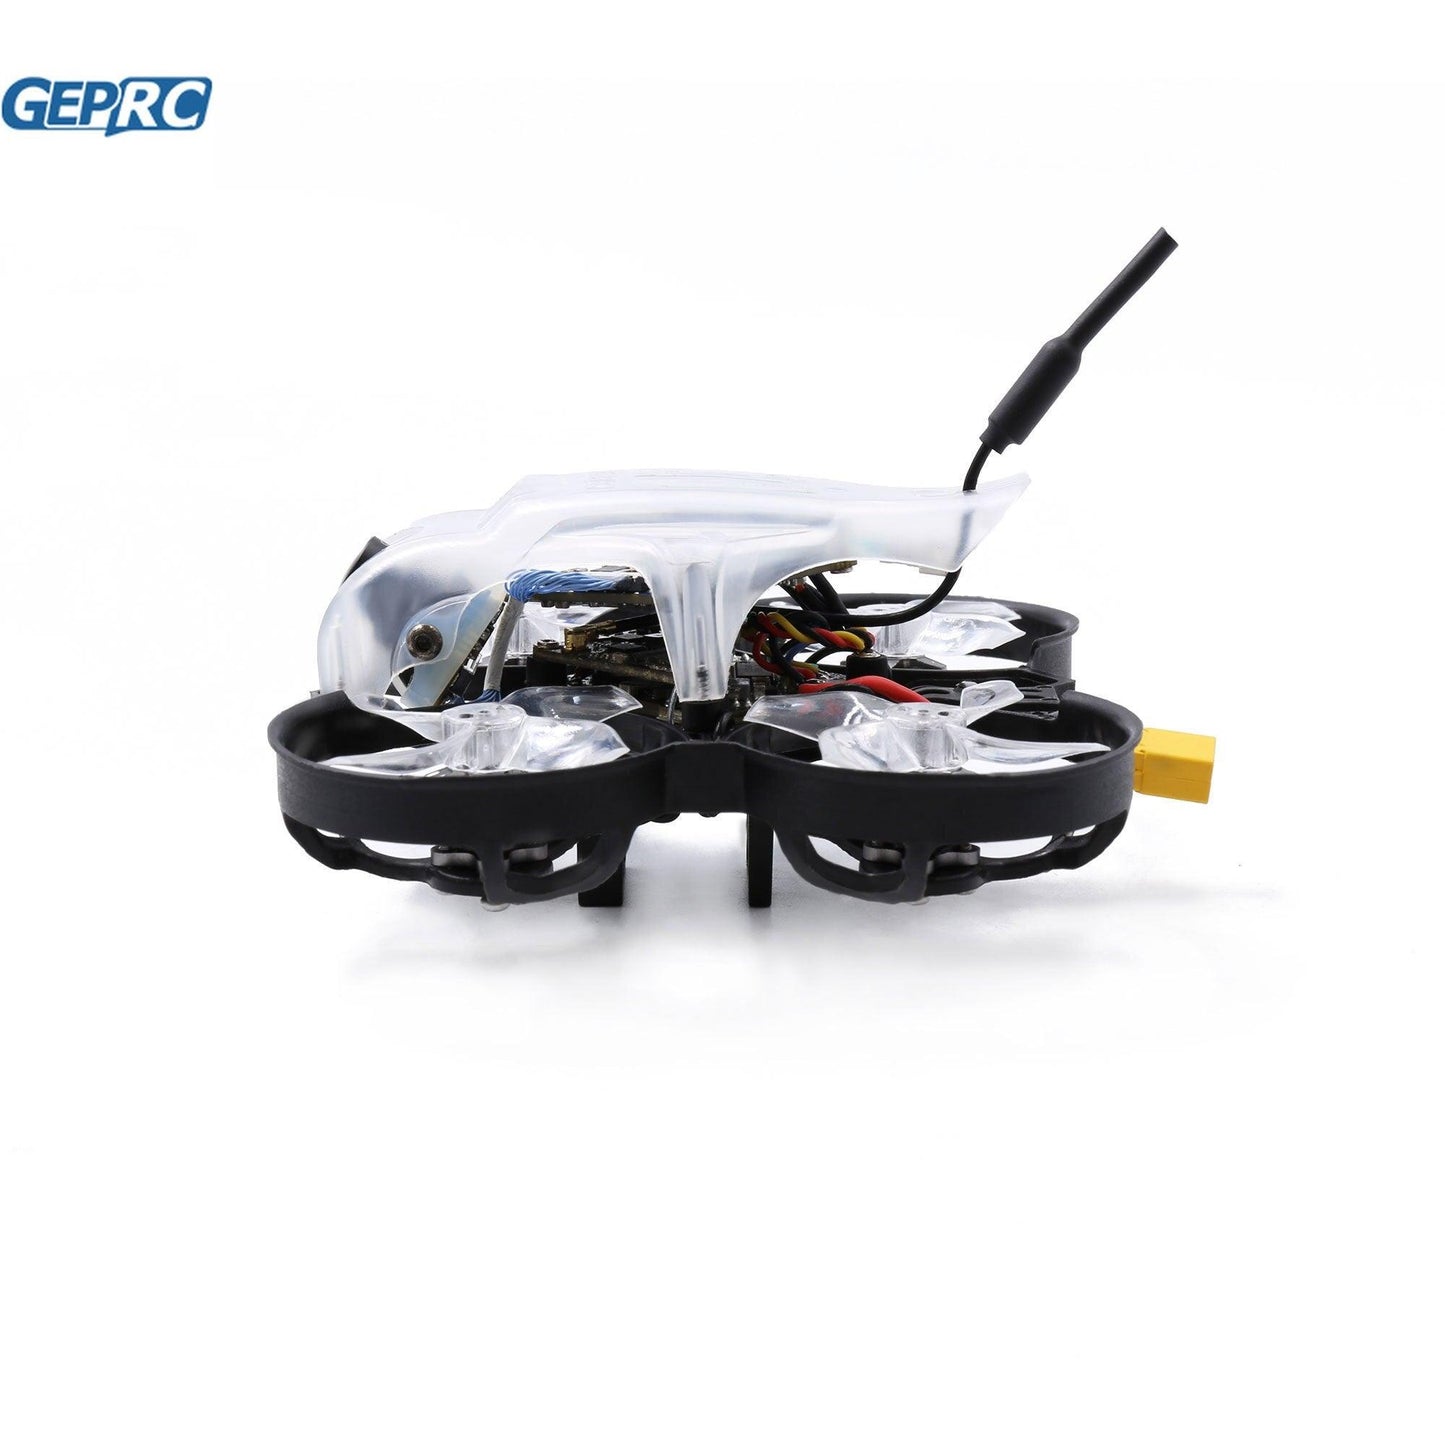 GEPRC Thinking P16 FPV Drone - 4K GR1103 8000KV Caddx Loris 4K Cinewhoop For RC FPV Quadcopter Racing Freestyle Drone - RCDrone